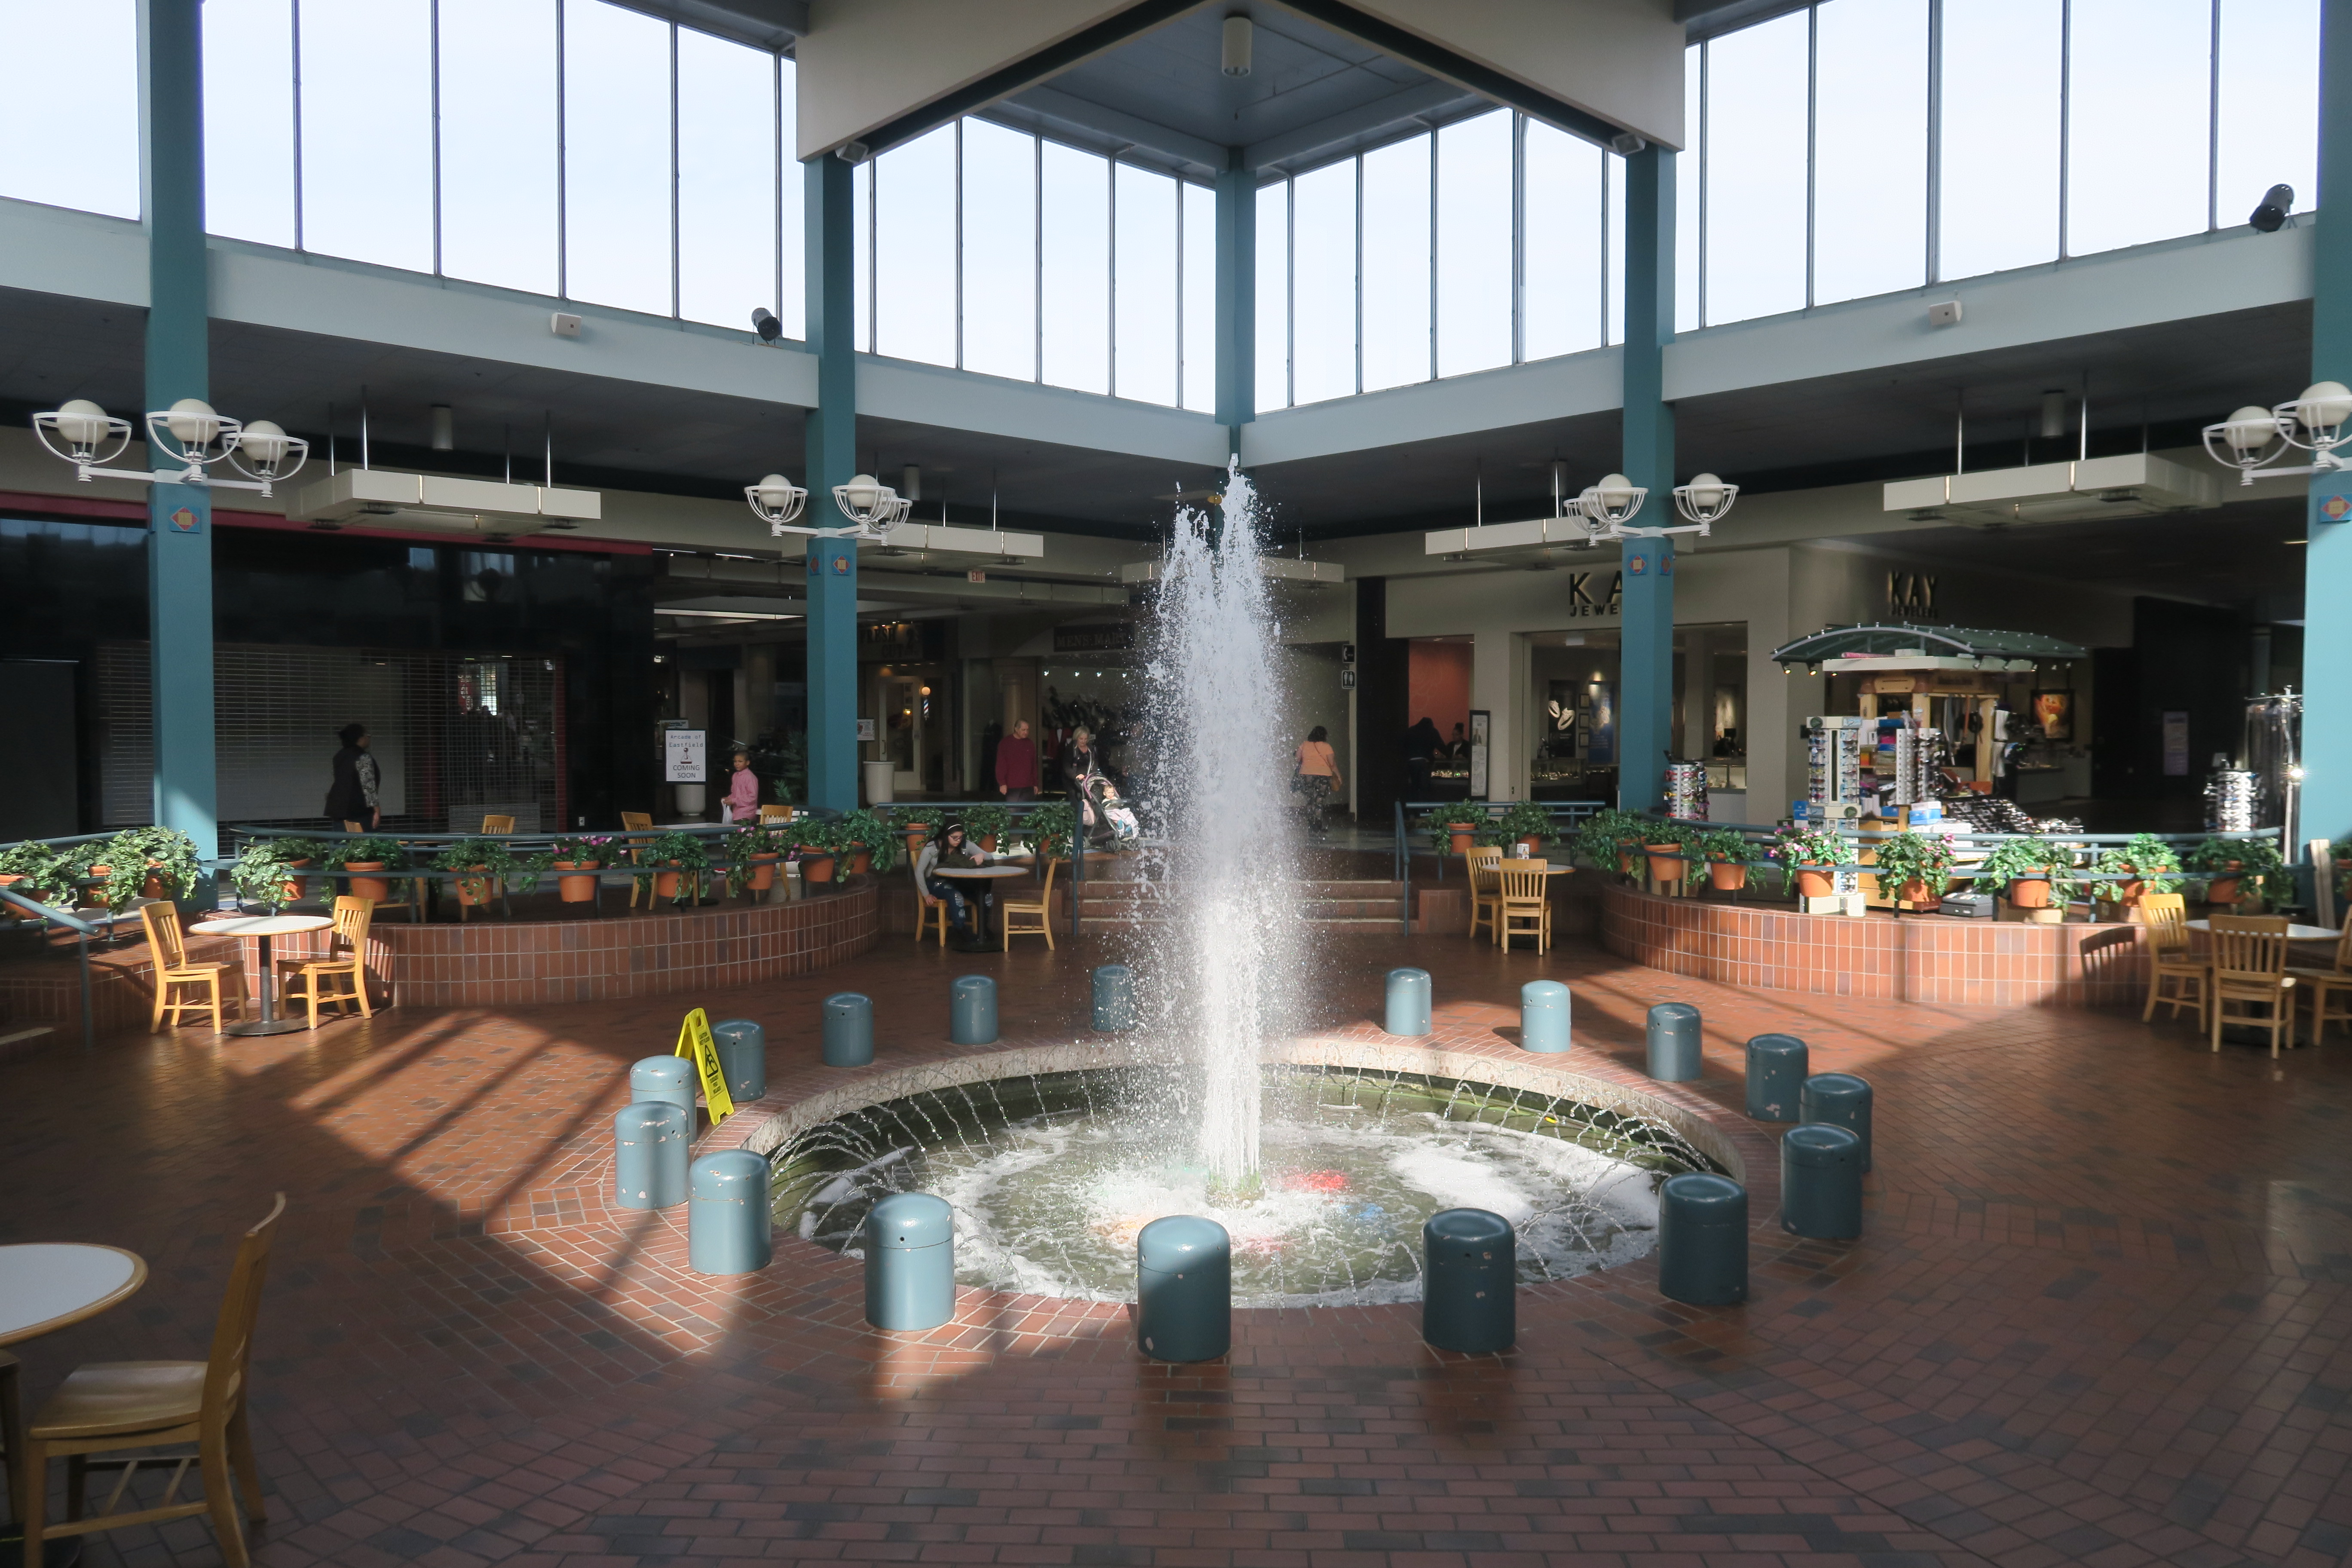 Old fountains and aquariums at Woodfield Mall.